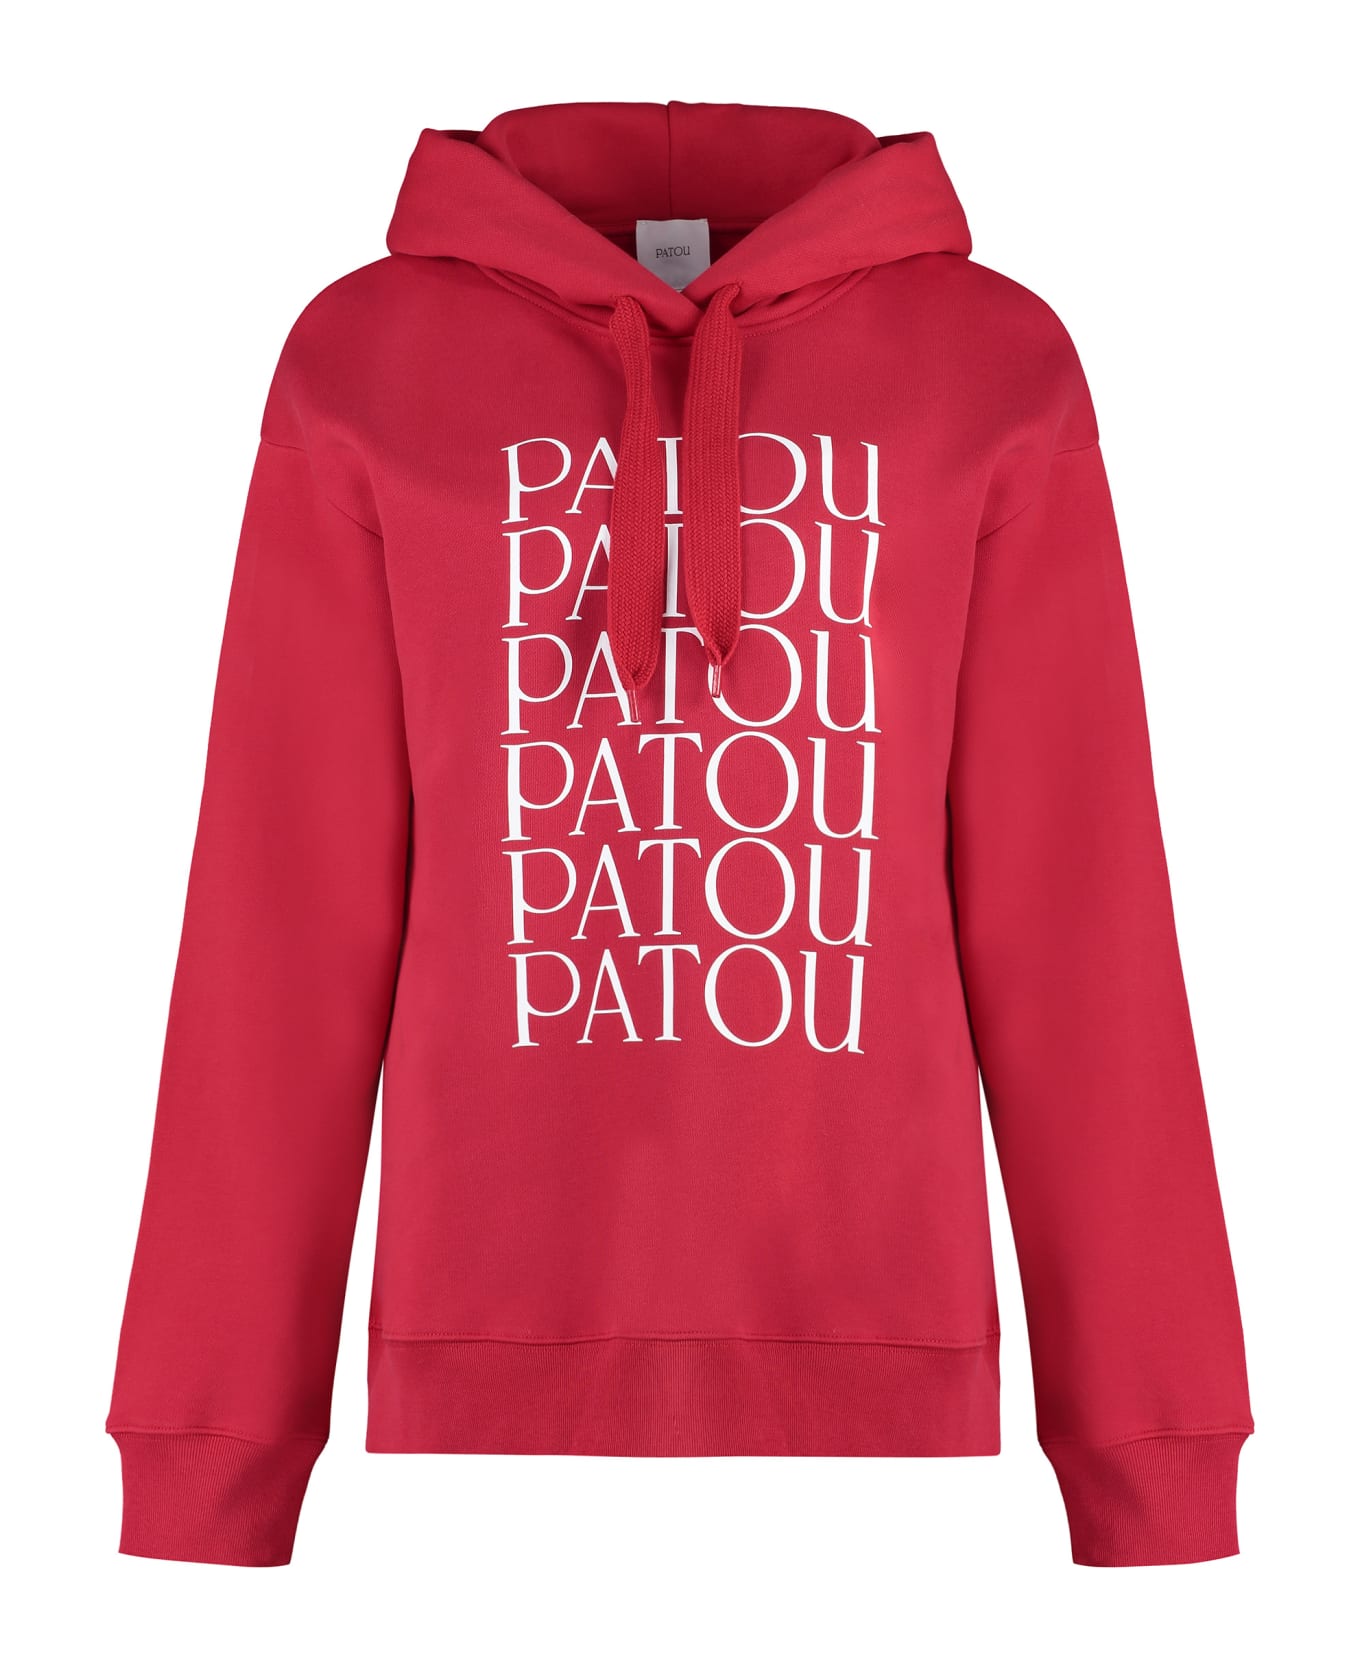 Patou Cotton Hoodie - red